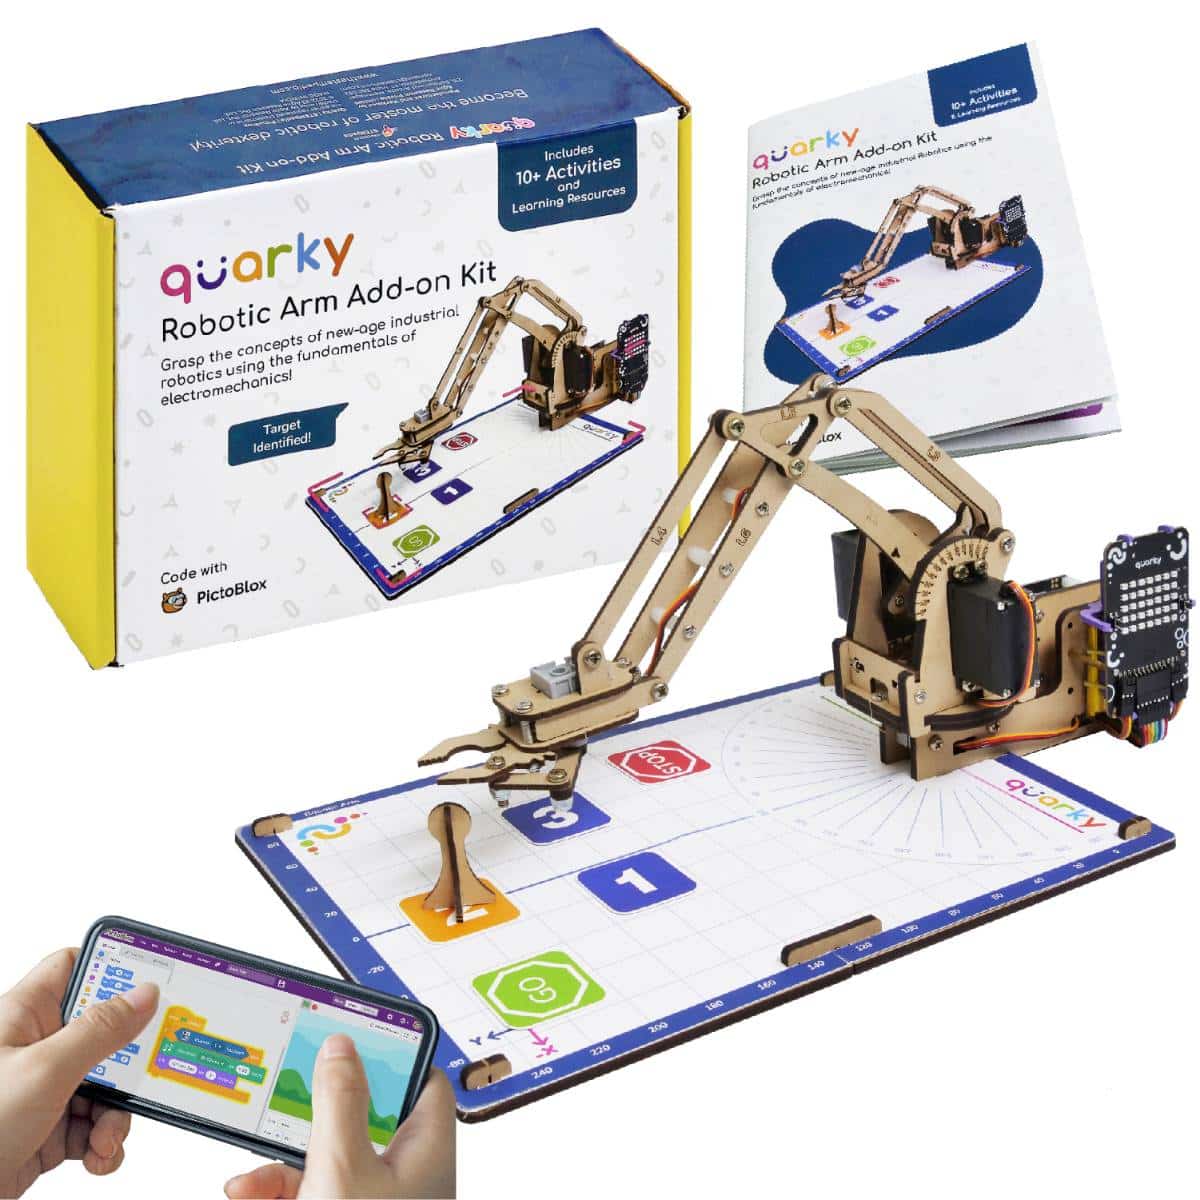 Quarky Robotic Arm controlled by a smartphone, precisely picks and places objects on its base arena.